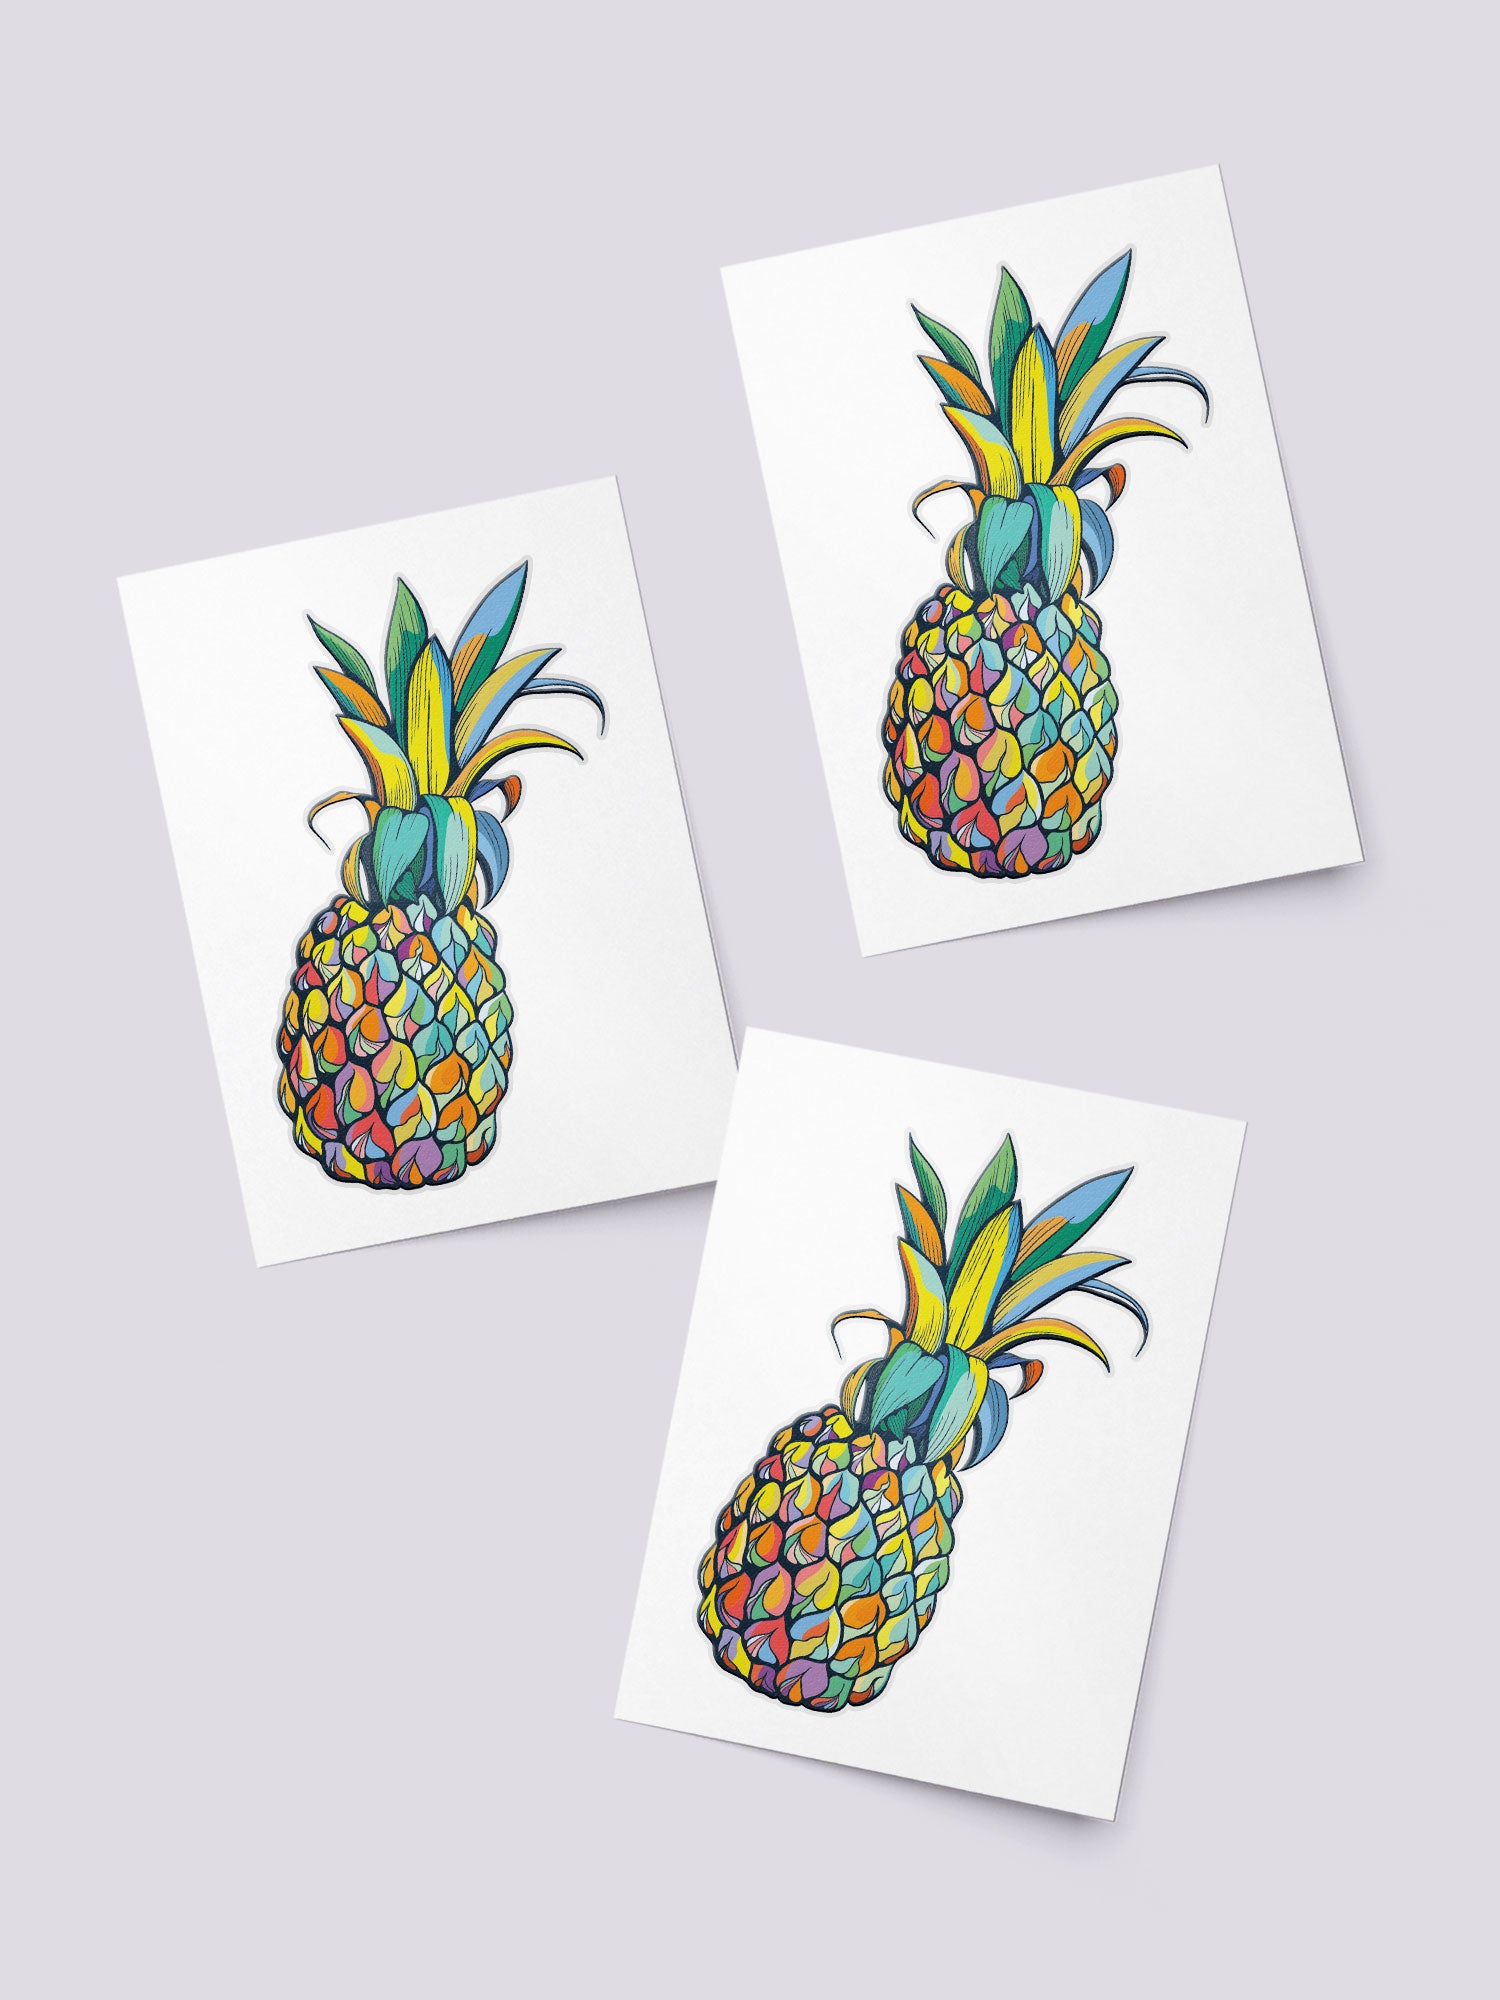 The Girl with the Pineapple Tattoo – The Girl With the Pineapple Tattoo